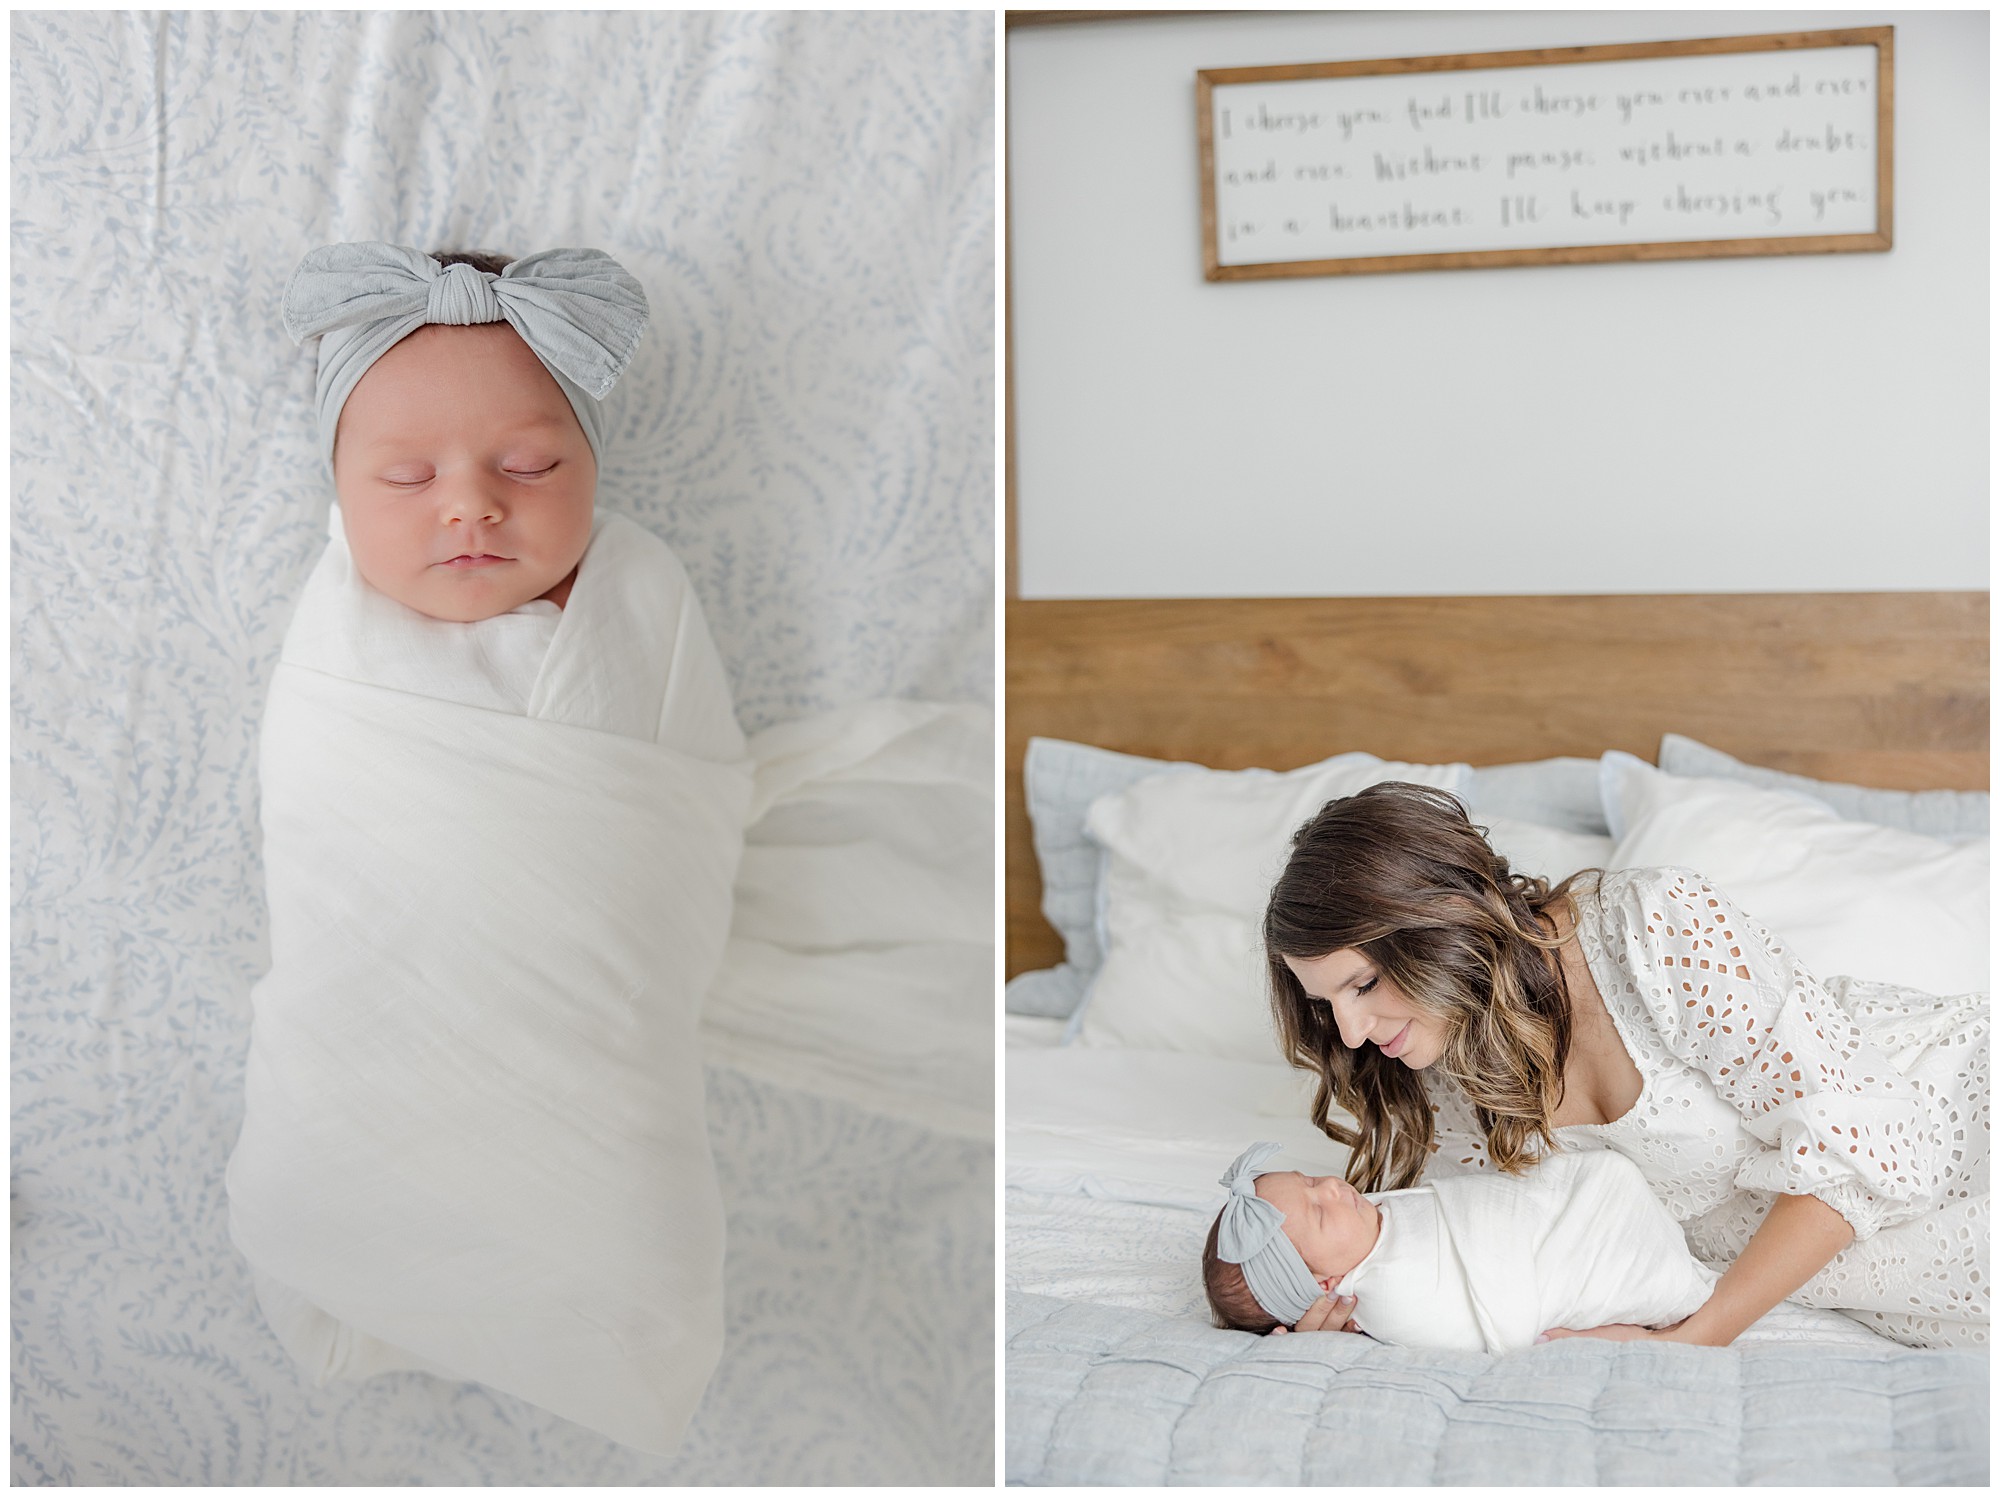 Newborn baby girl wrapped in a white swaddle with a blue bow in a portrait and a photo with her mother taken by Greenville SC in. home newborn photographer.